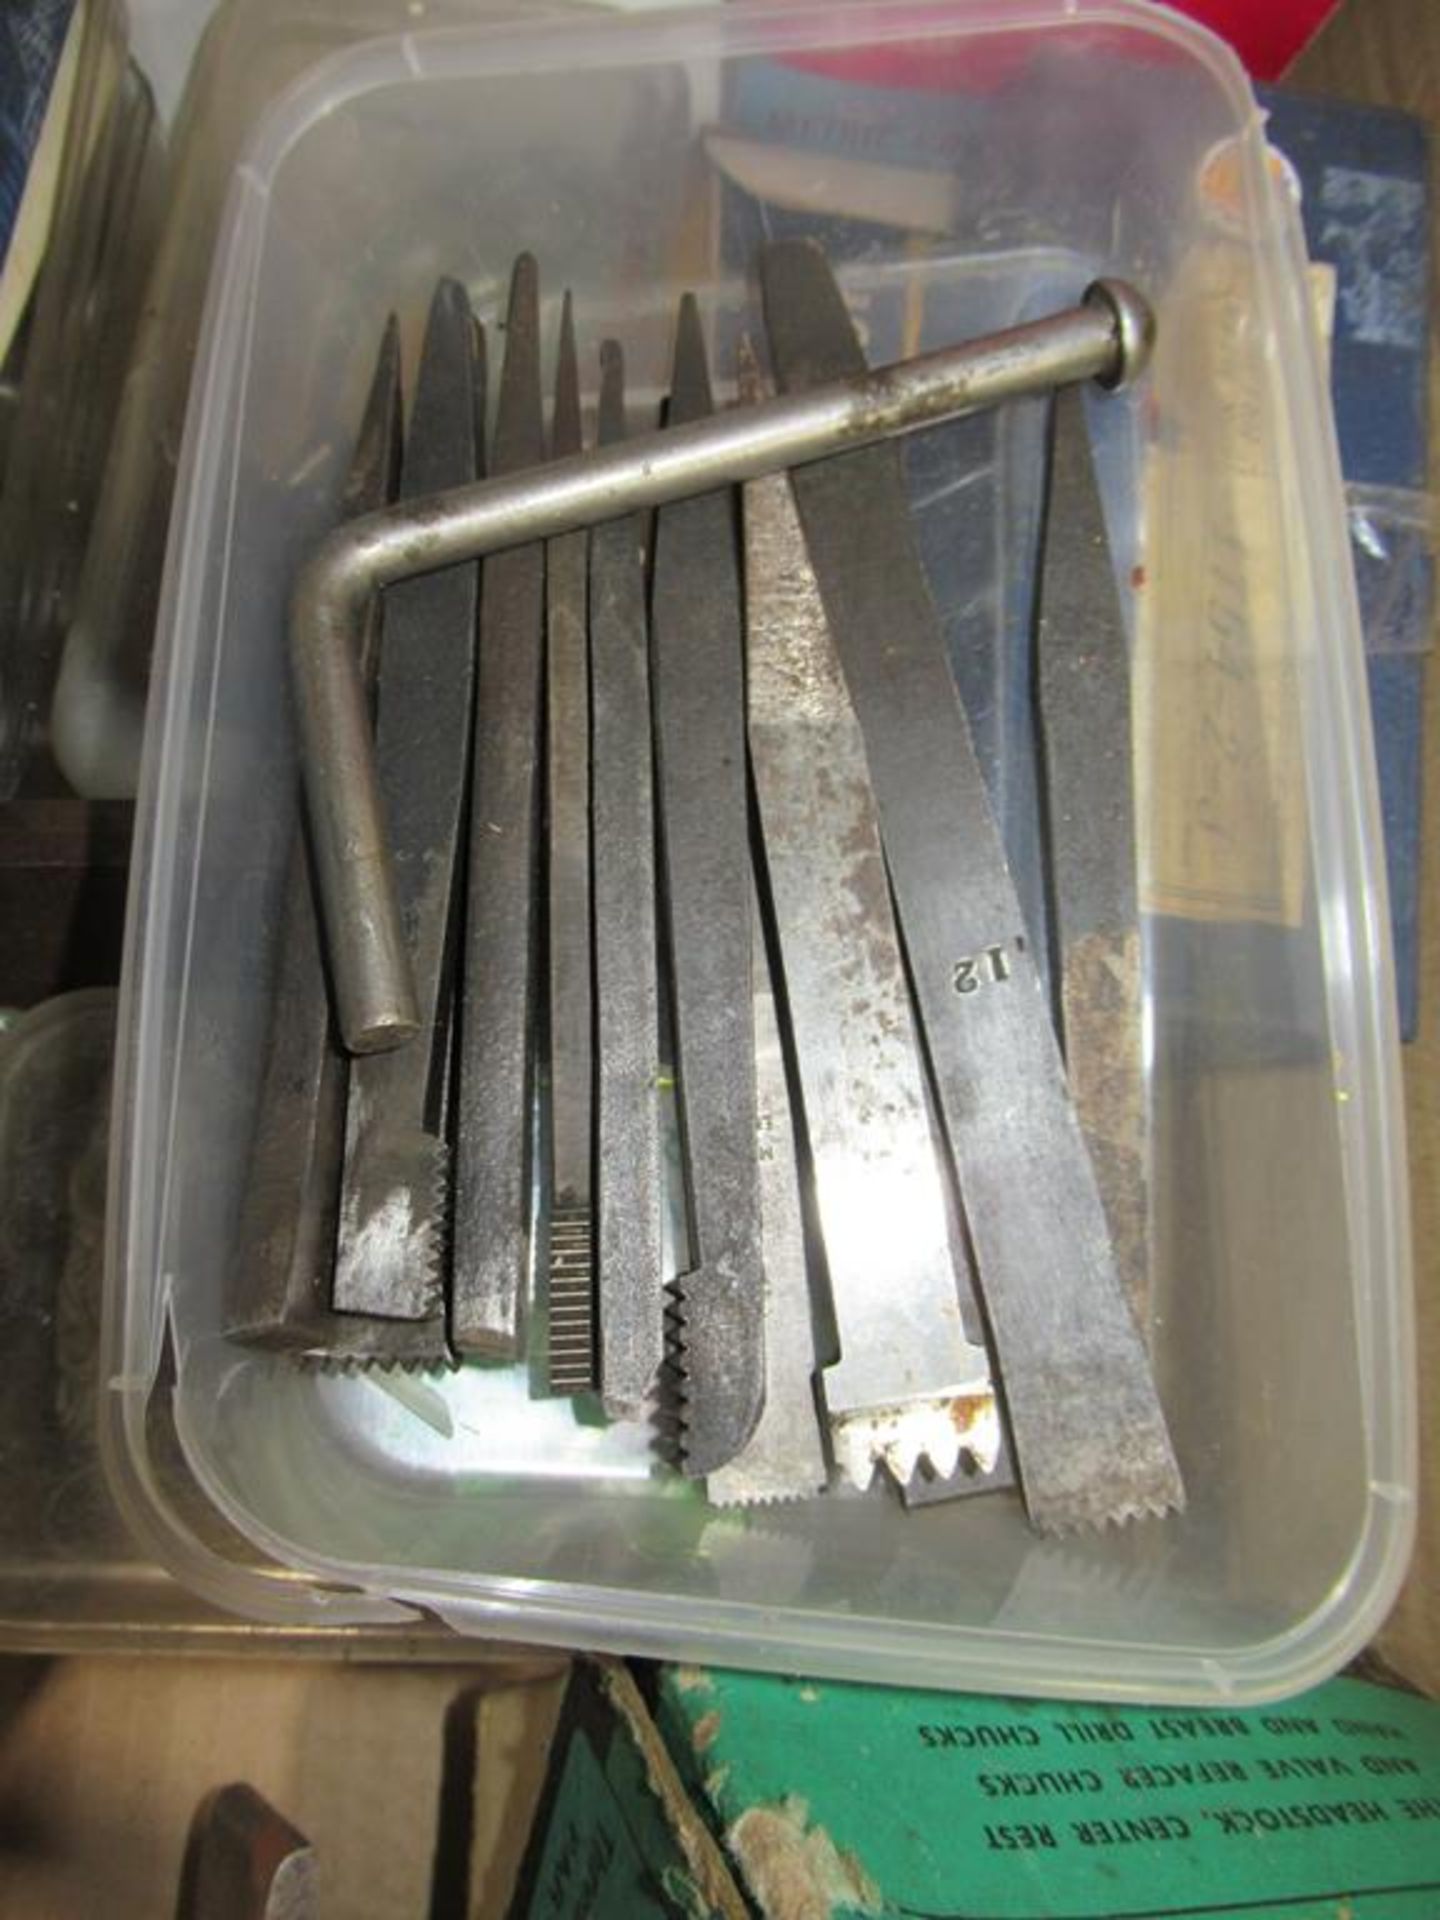 Box to contain various model making Gauges, Tools and other Metal Working Equipment - Image 7 of 7